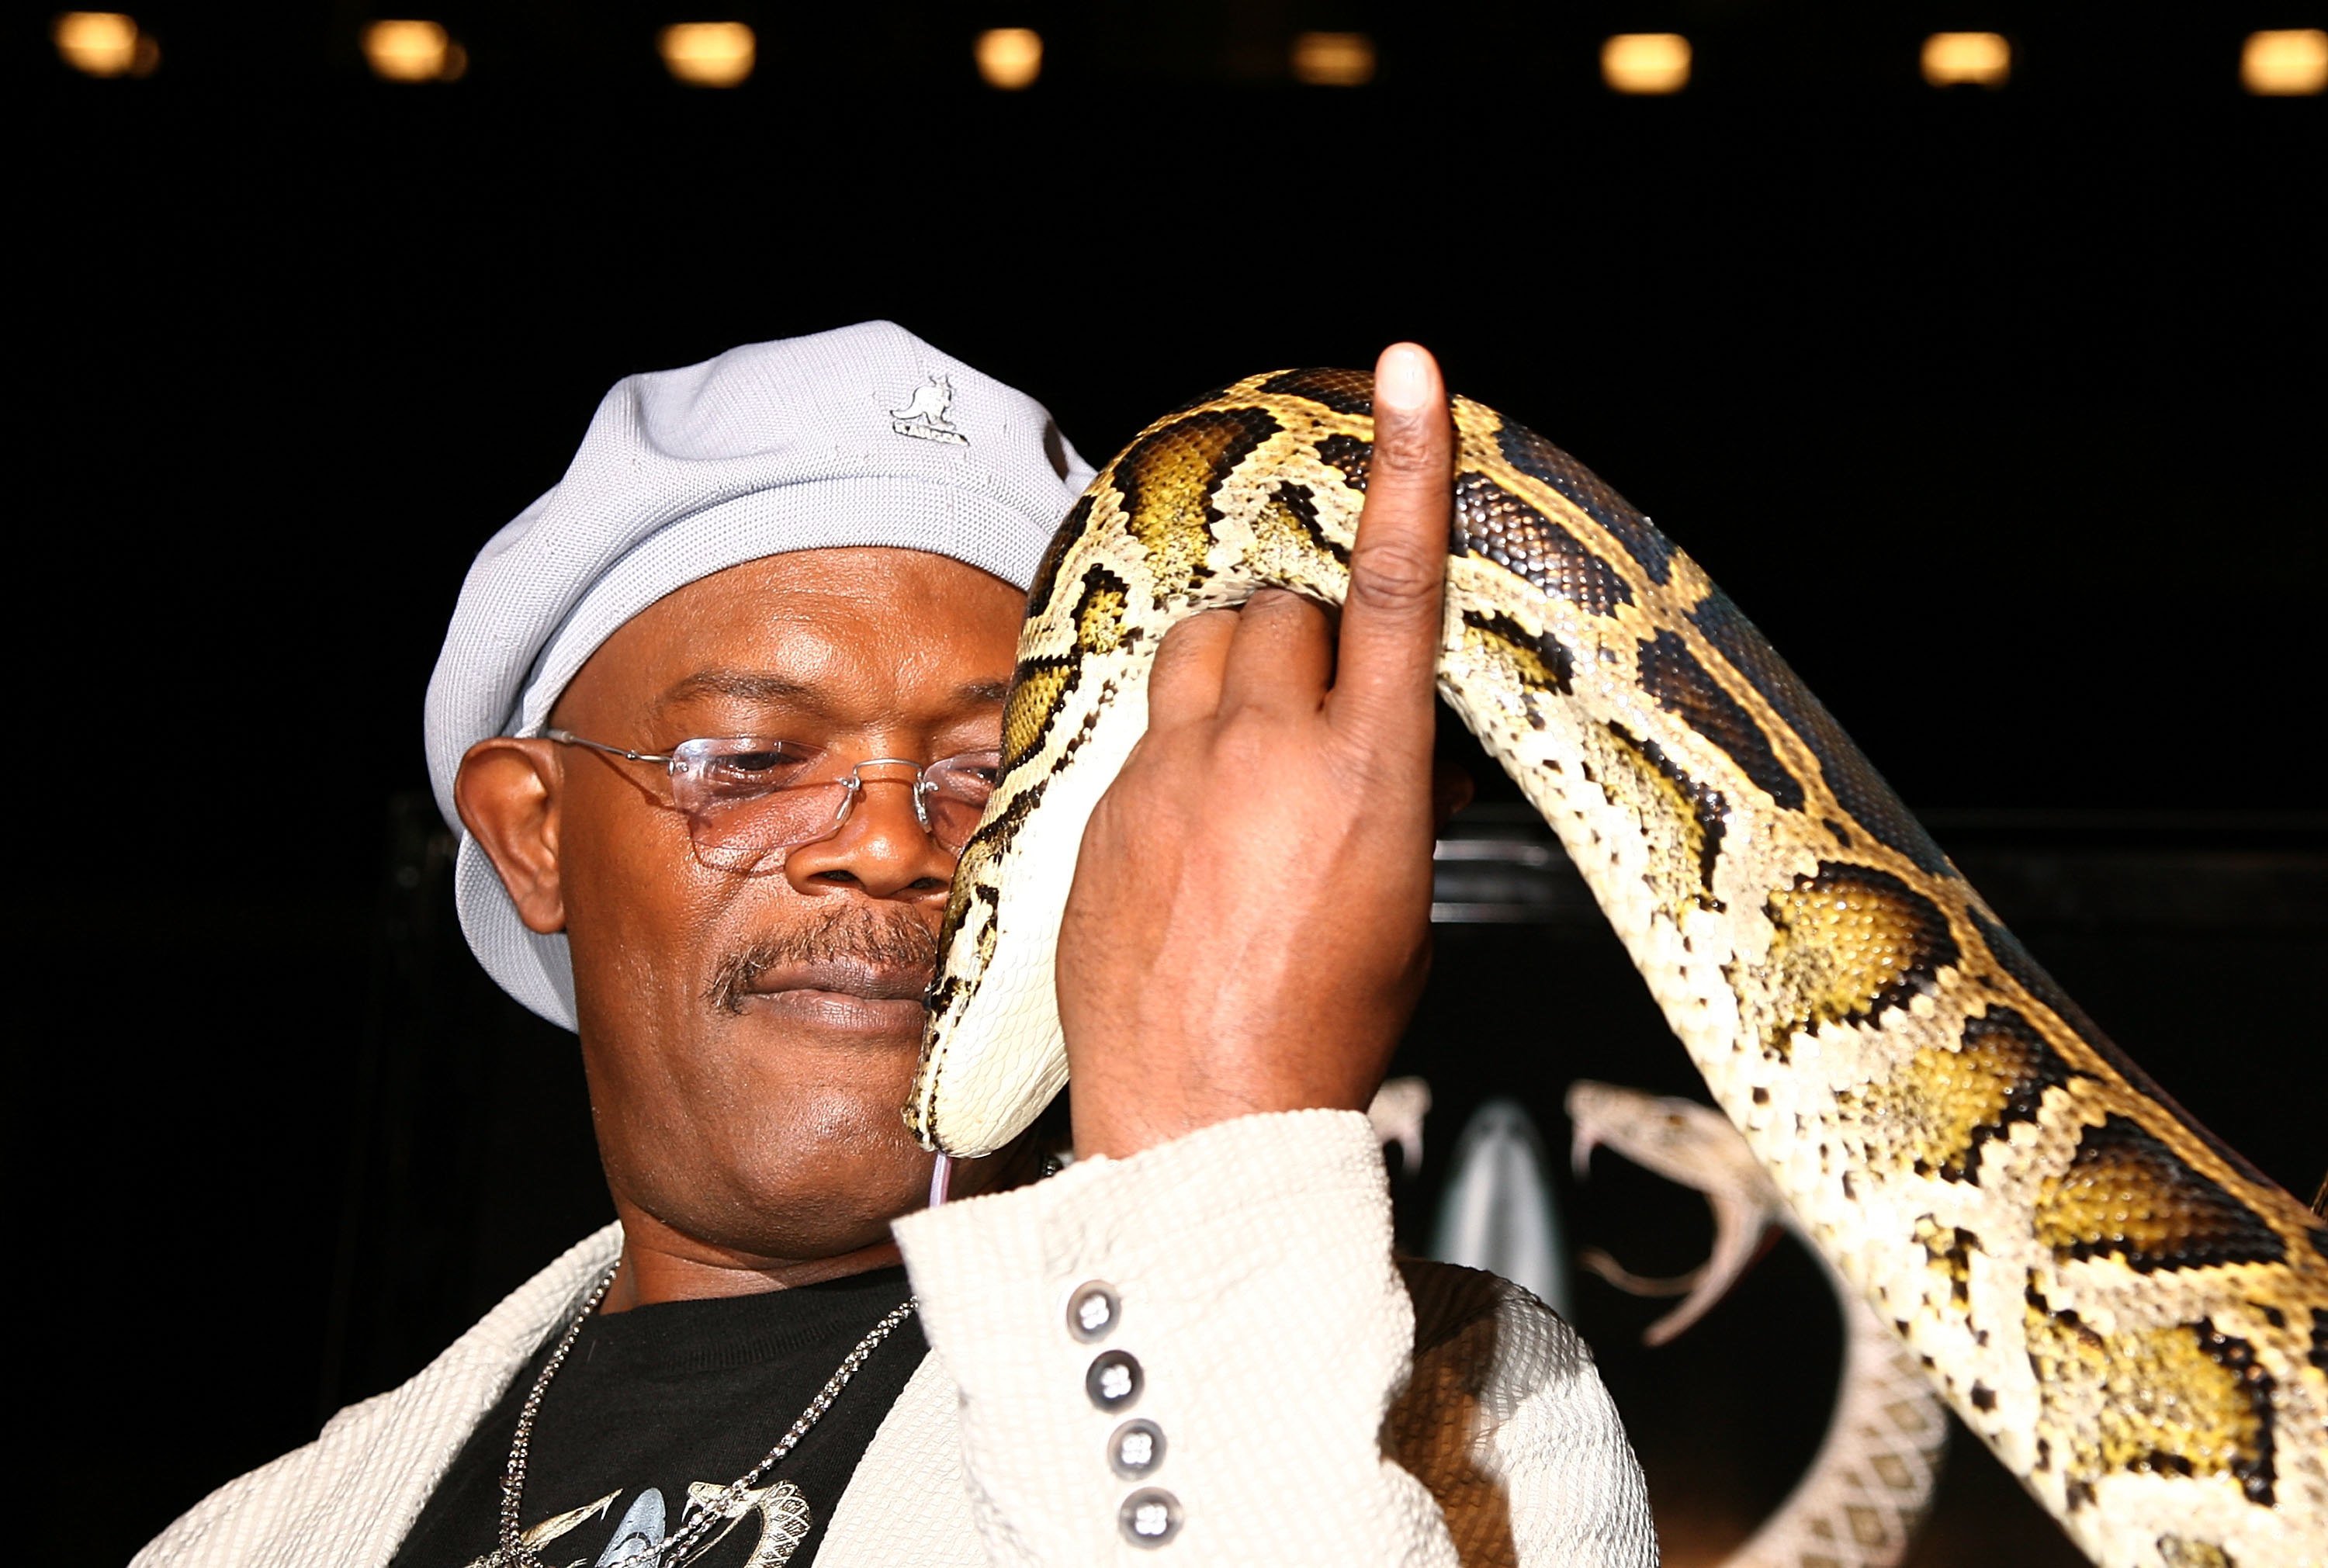 Samuel L. Jackson holds a snake at the movie premiere of Snakes on a Plane